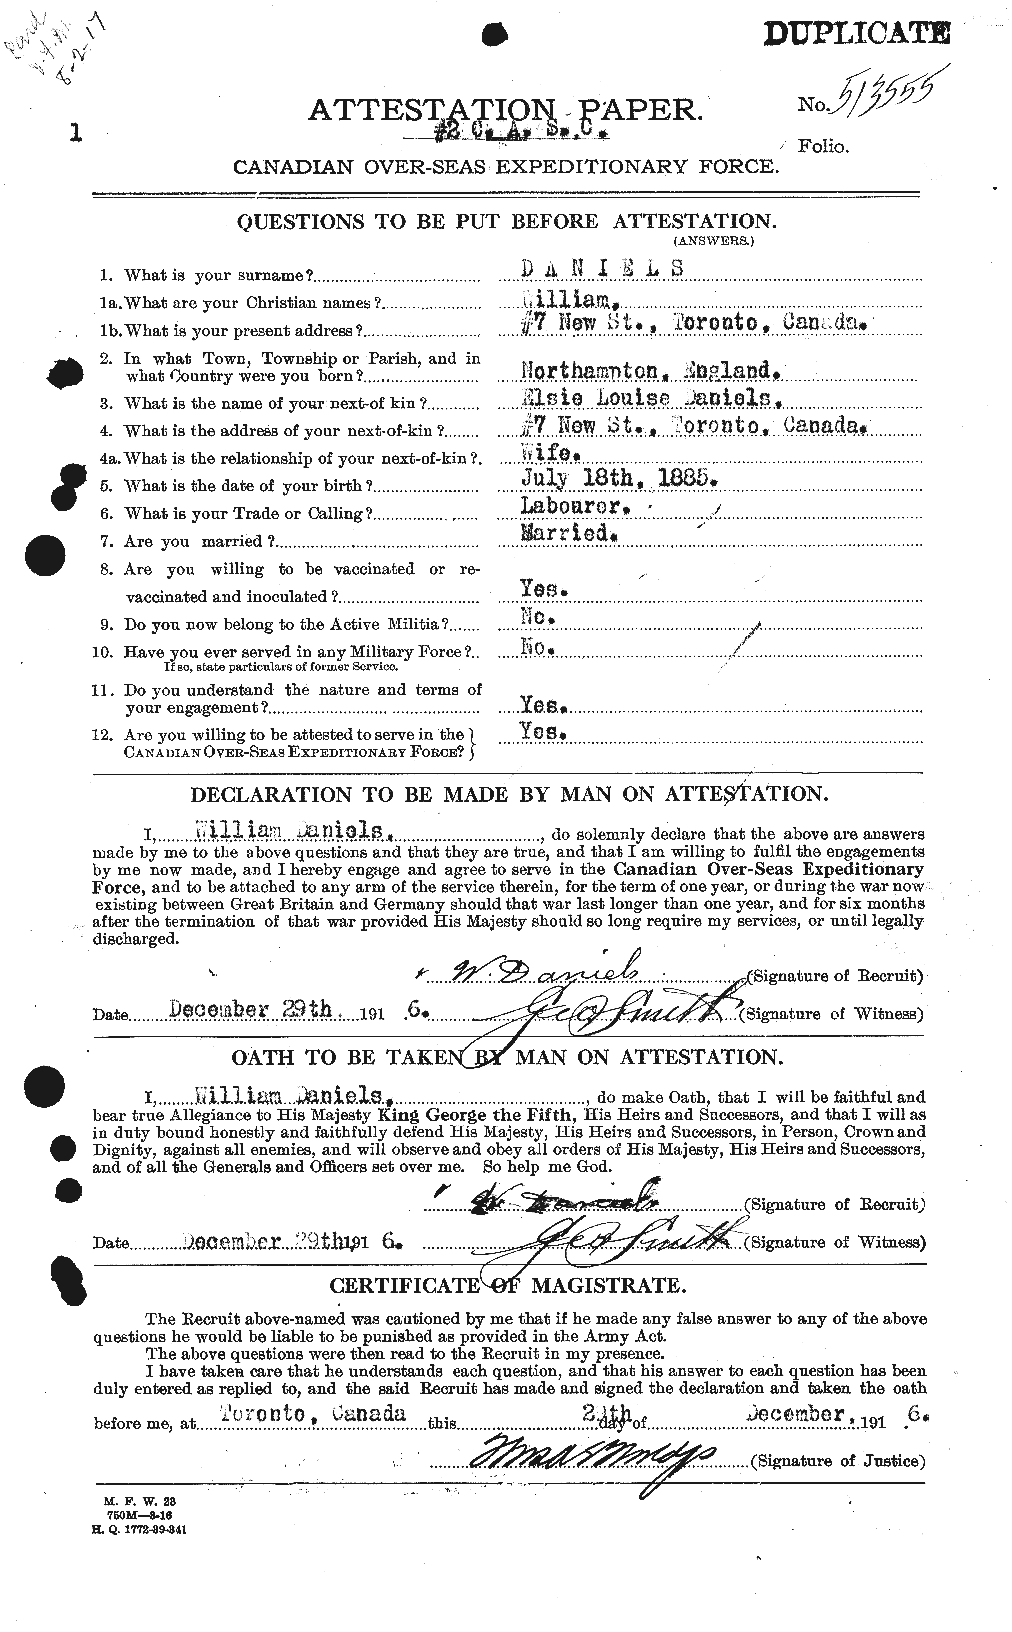 Personnel Records of the First World War - CEF 279691a